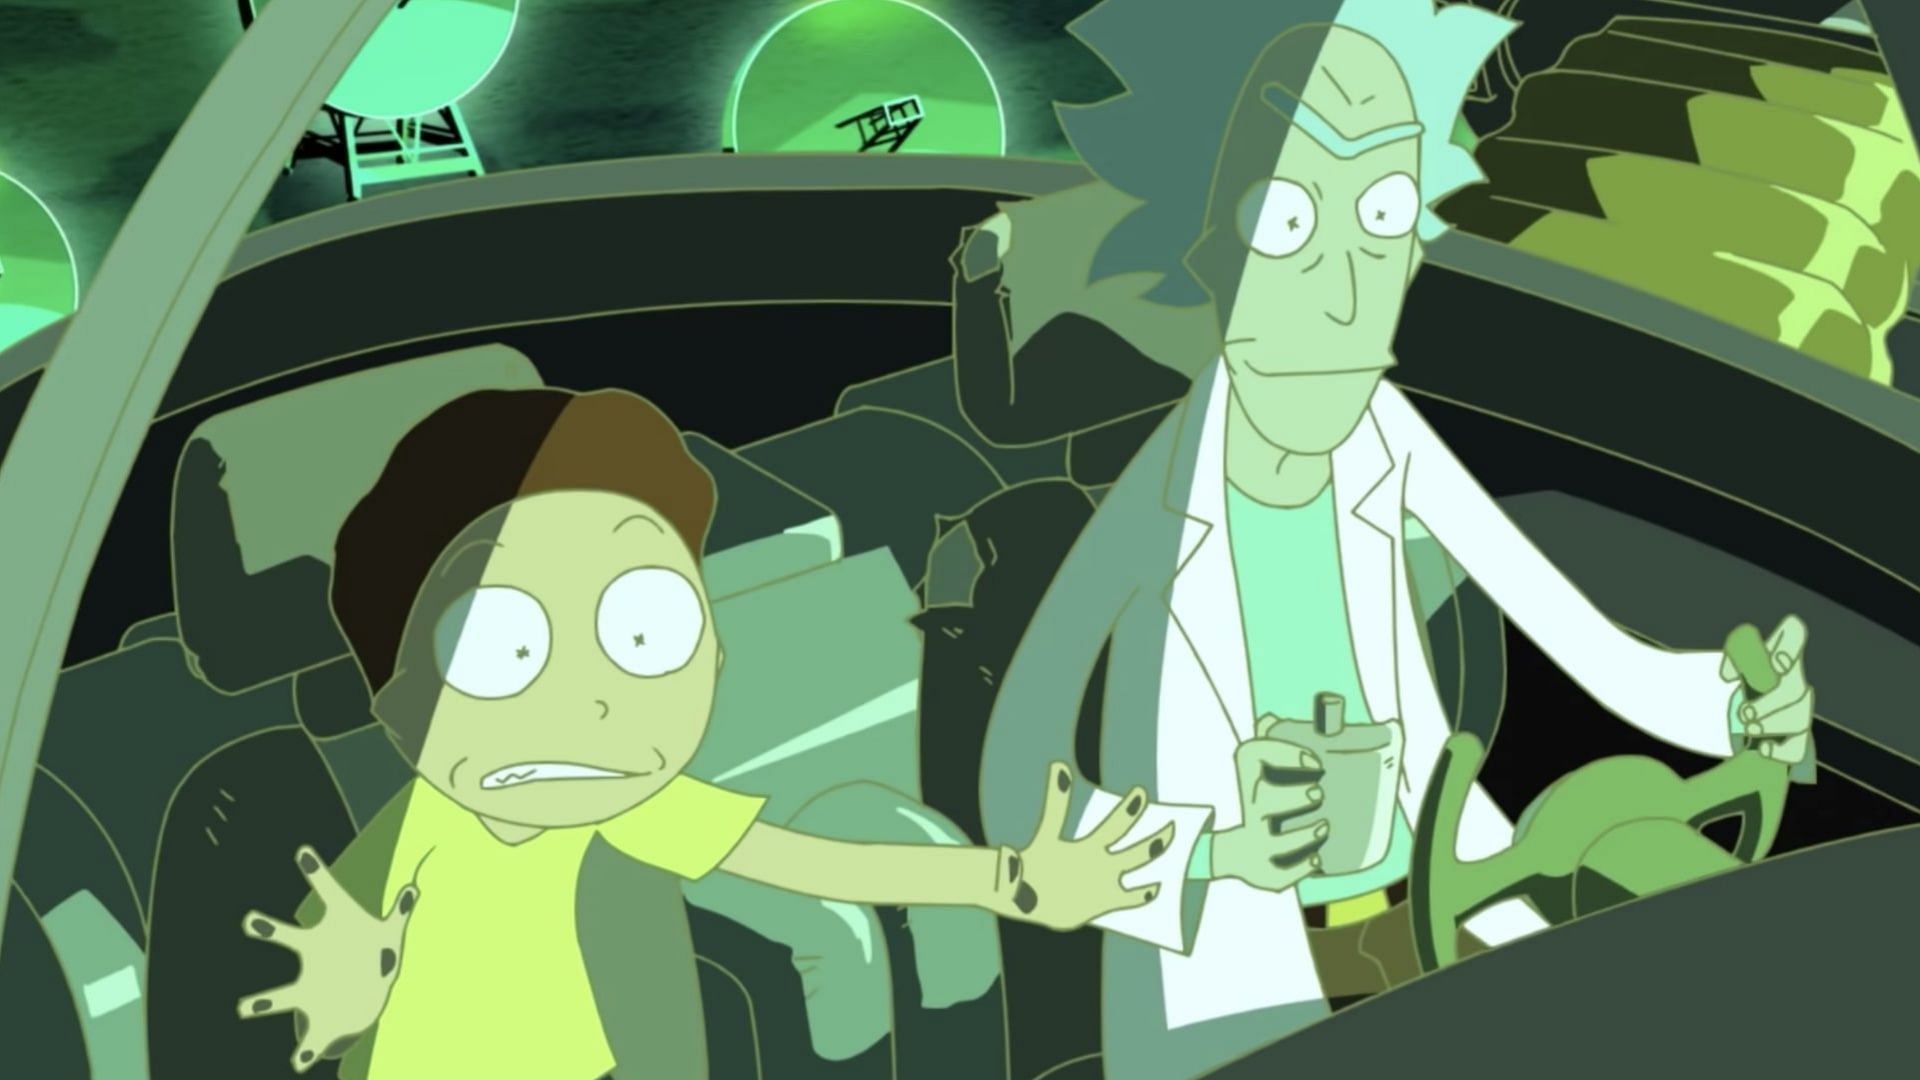 Rick and Morty: The Anime - Expected release date, cast, plot, and more (Image via Sola Entertainment, Telecom Animation Film)